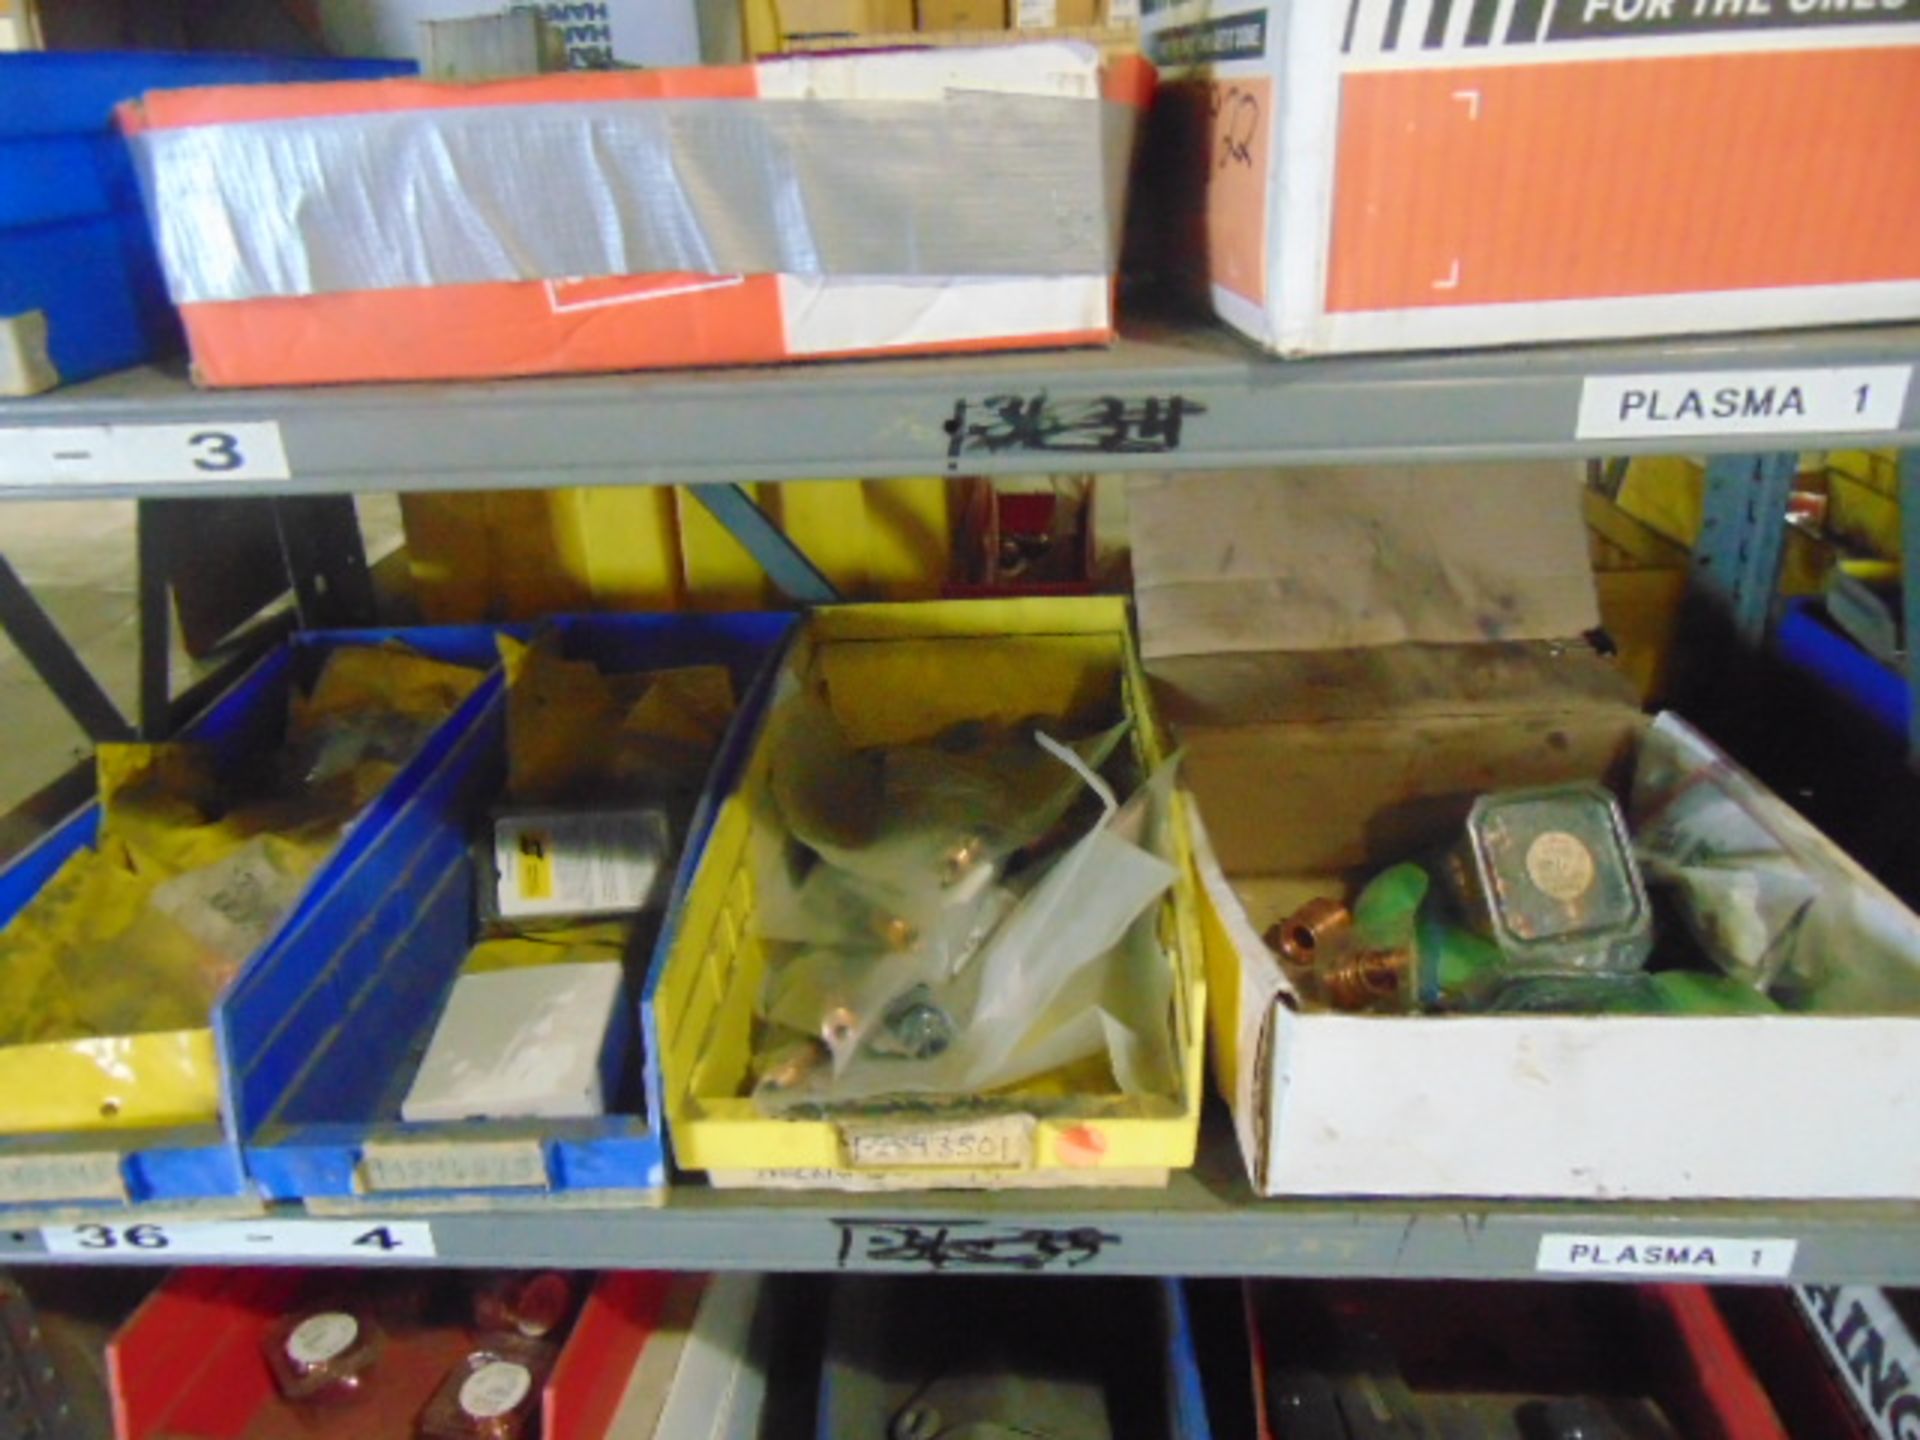 LOT OF PLASMA REPLACEMENT PARTS, assorted (in one section of shelving) - Image 4 of 5